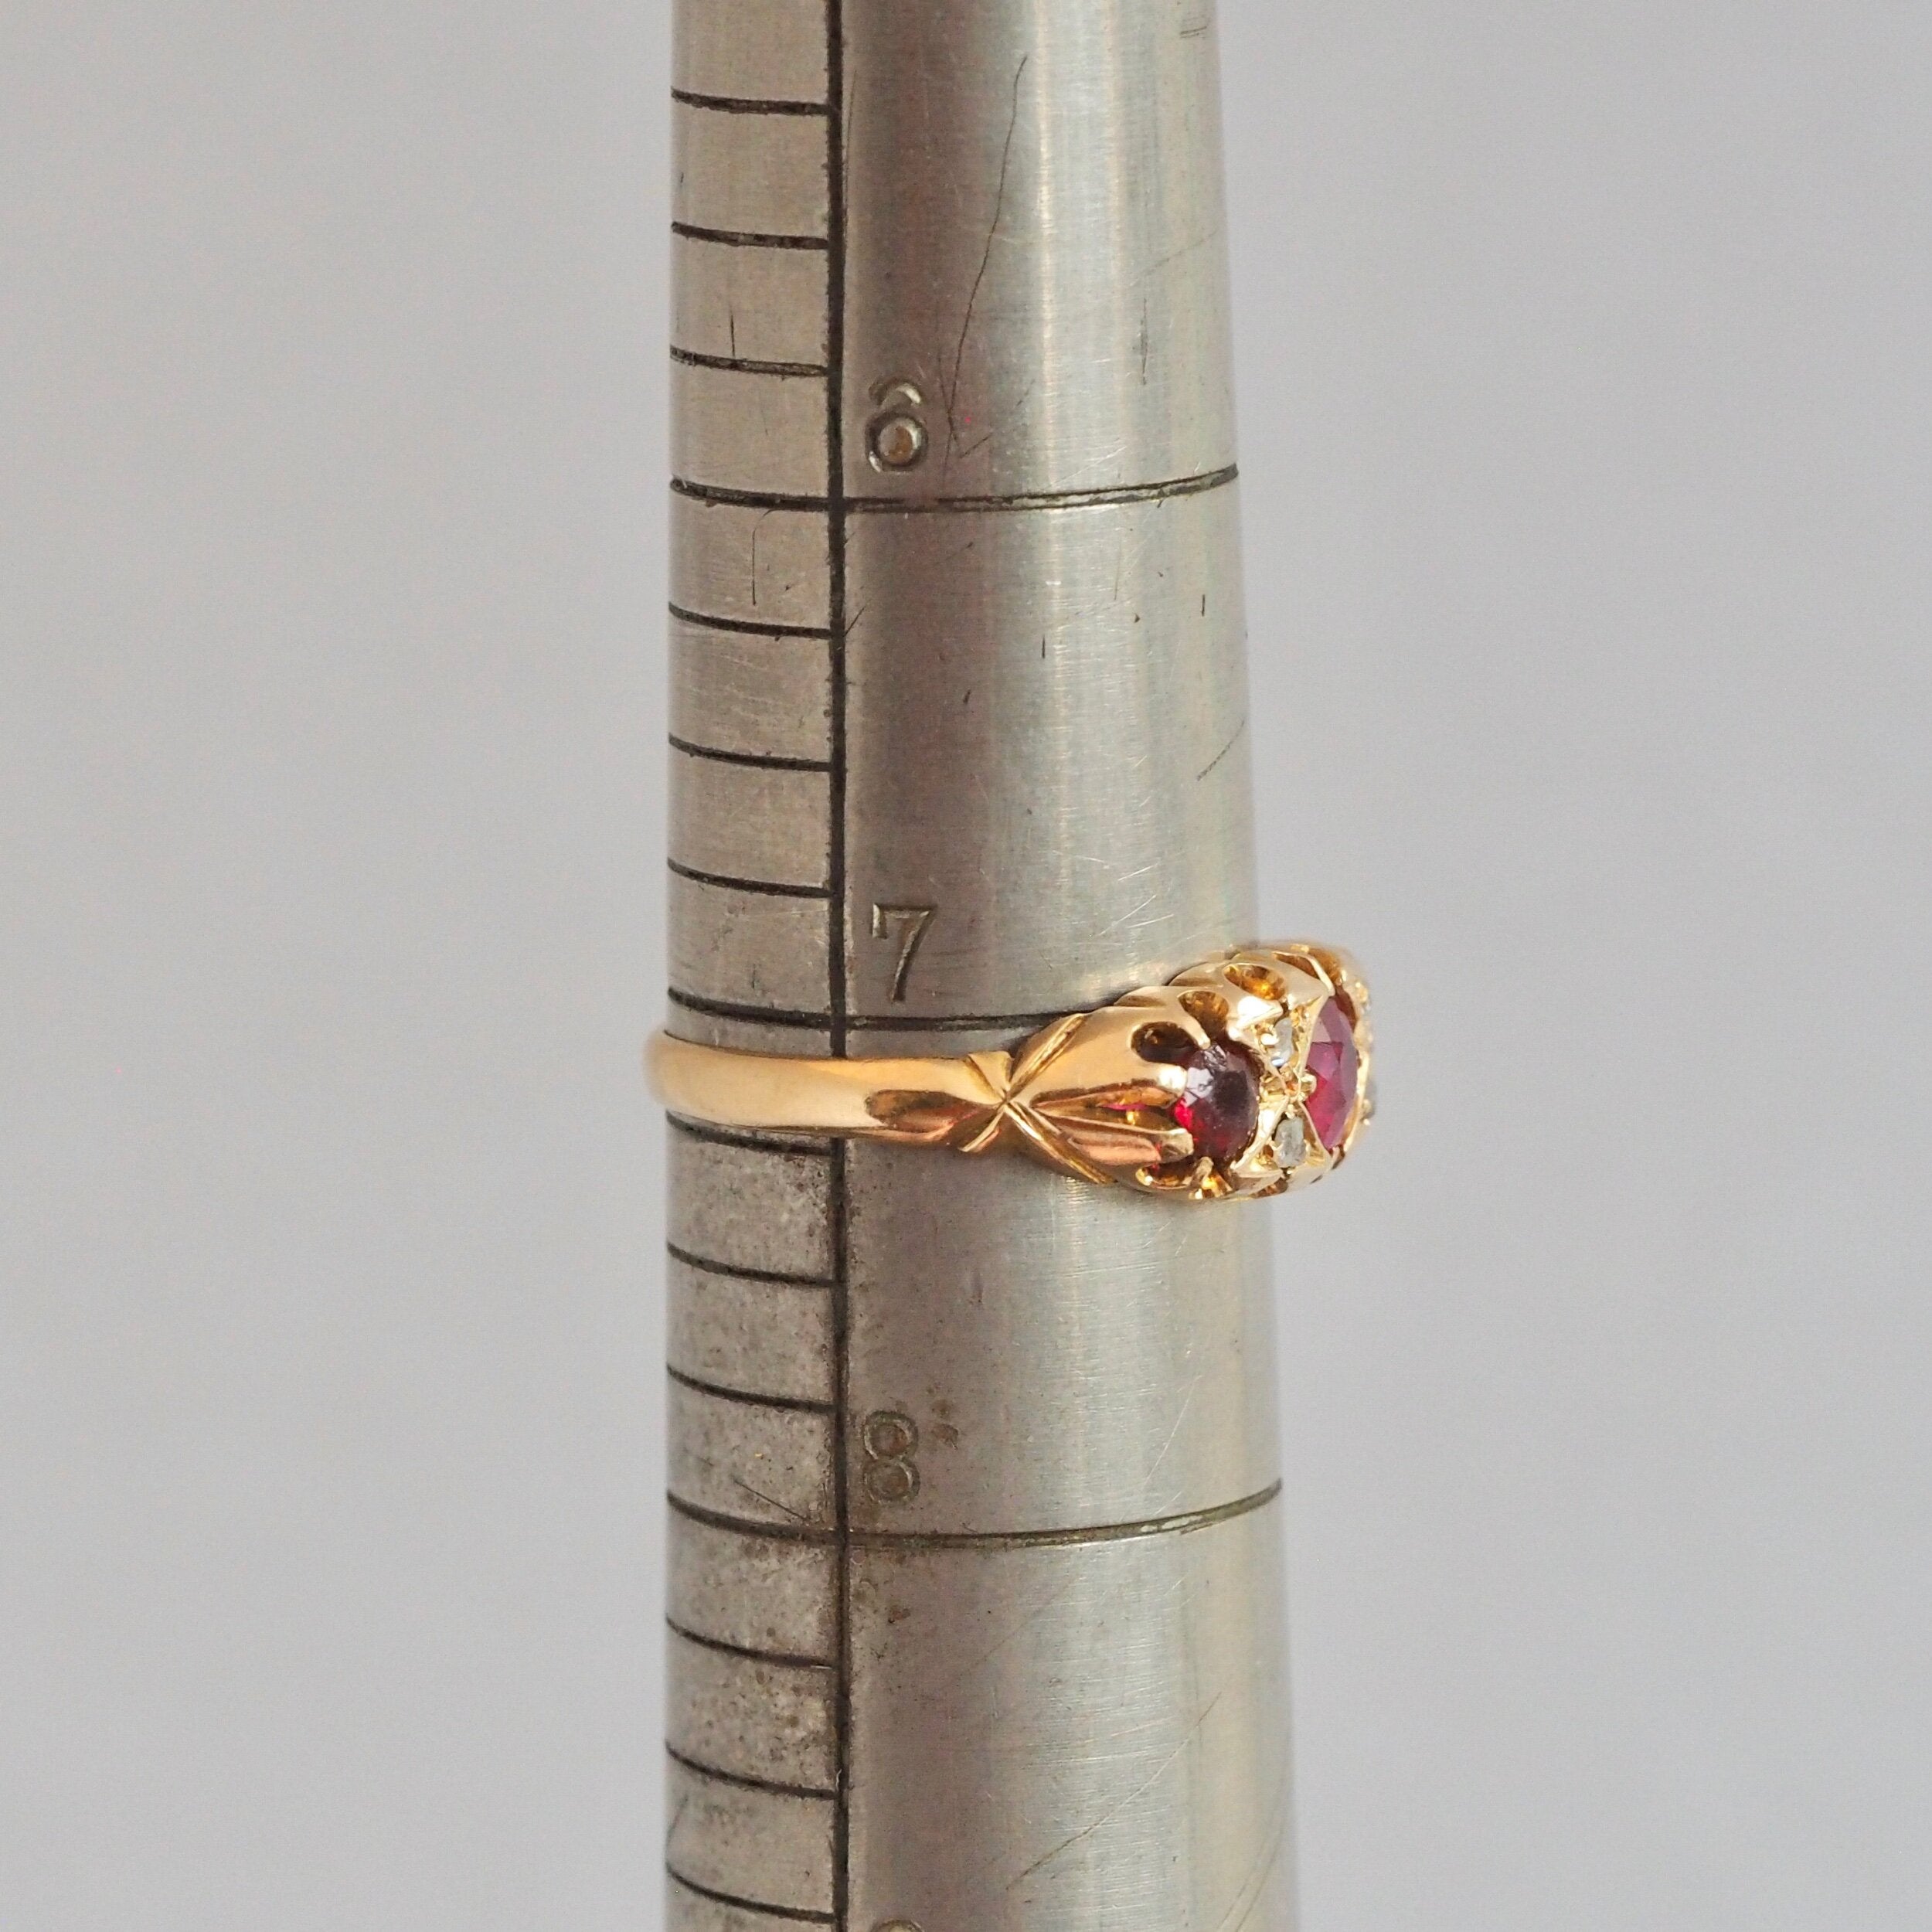 Antique English 18k Gold Ruby and Diamond Ring